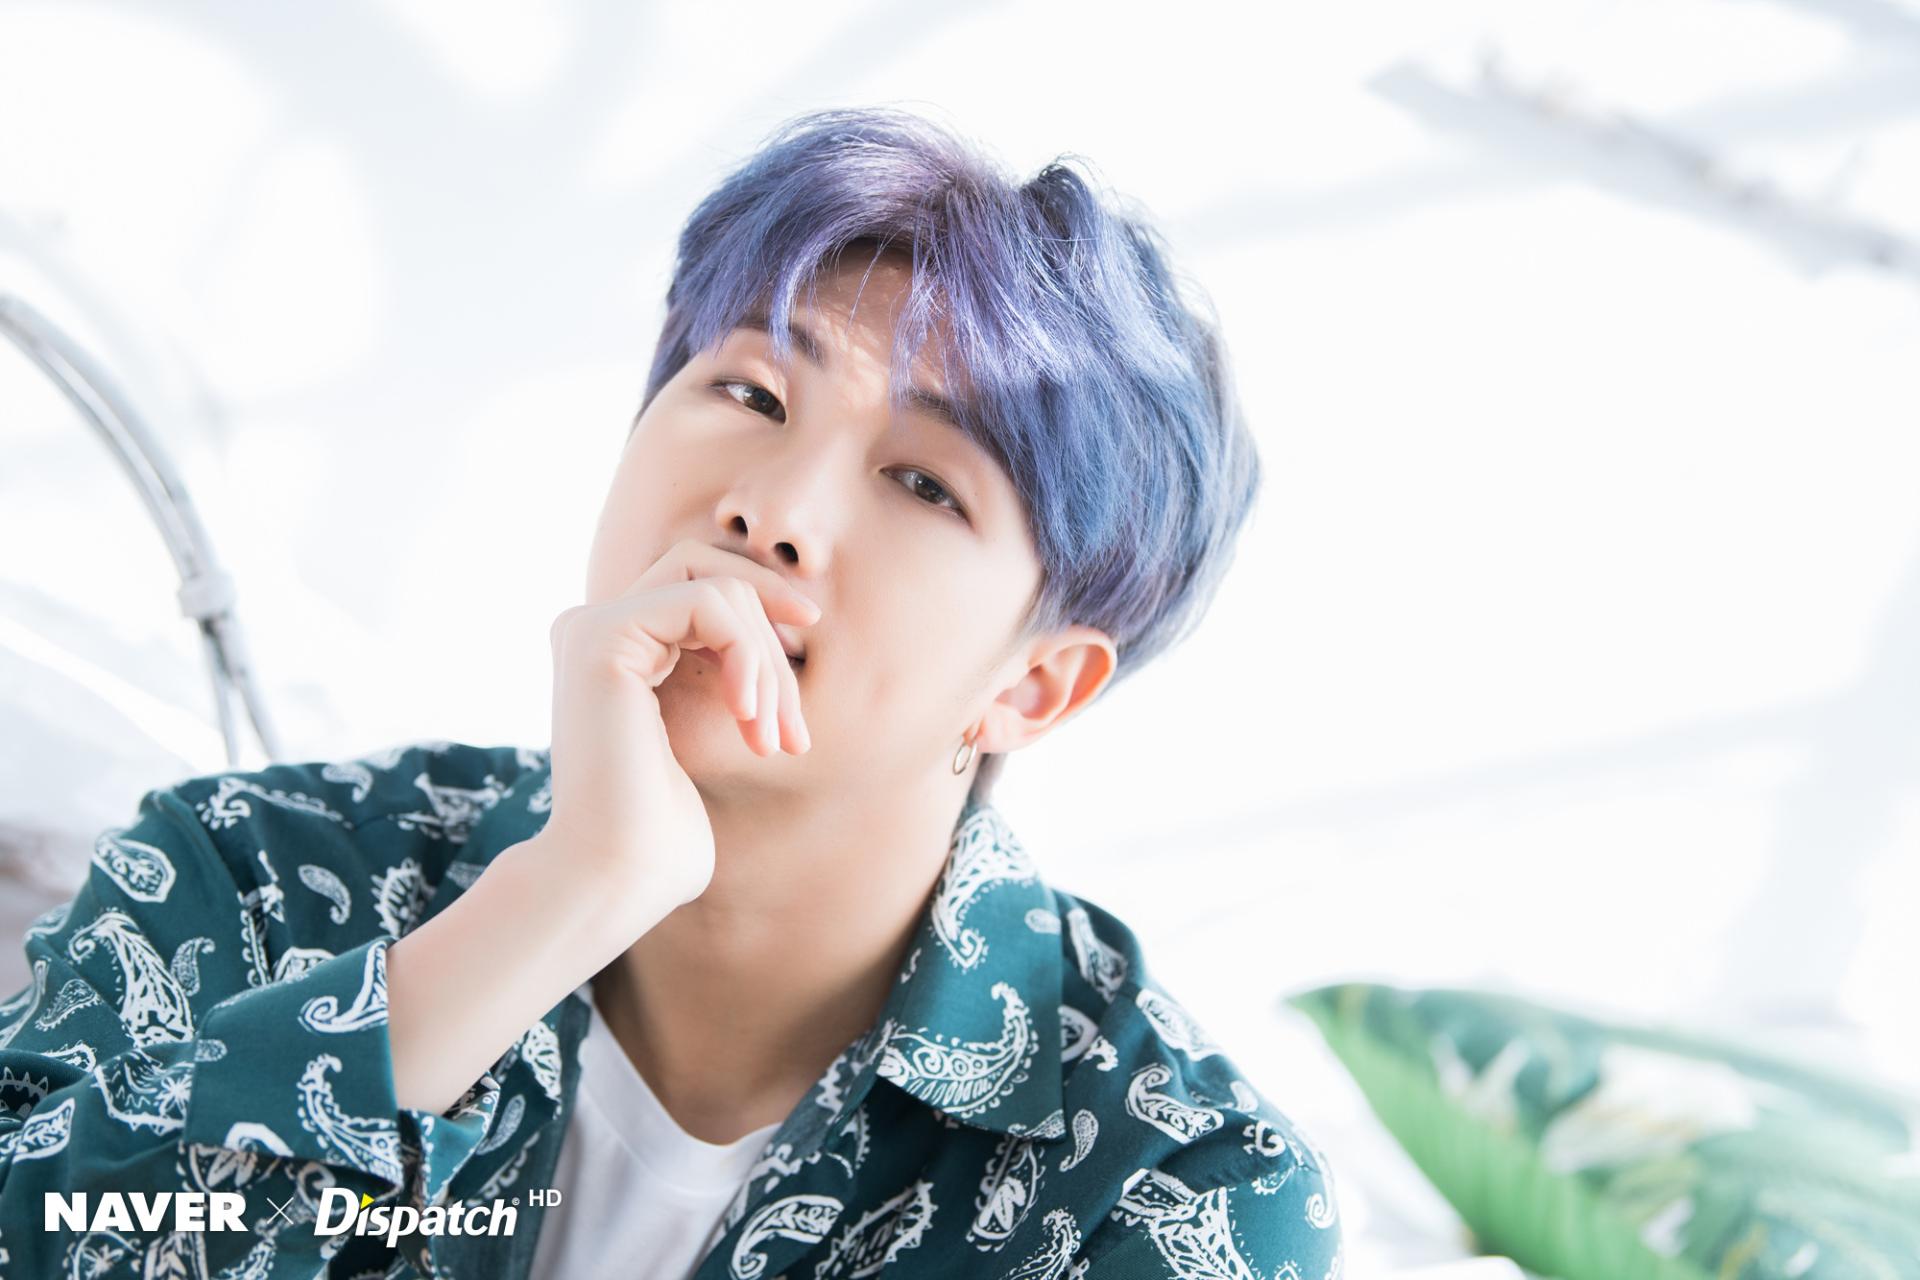 Bts Image Rm HD Wallpaper And Background Photos